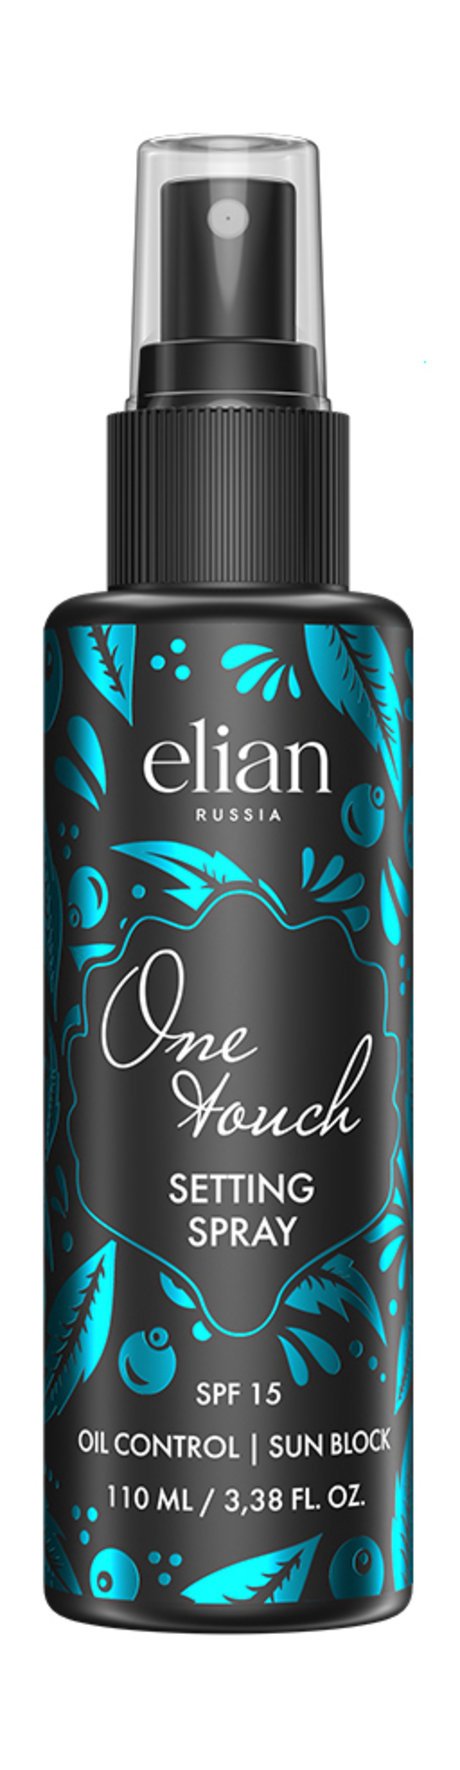 Elian Russia One Touch Setting Spray SPF 15